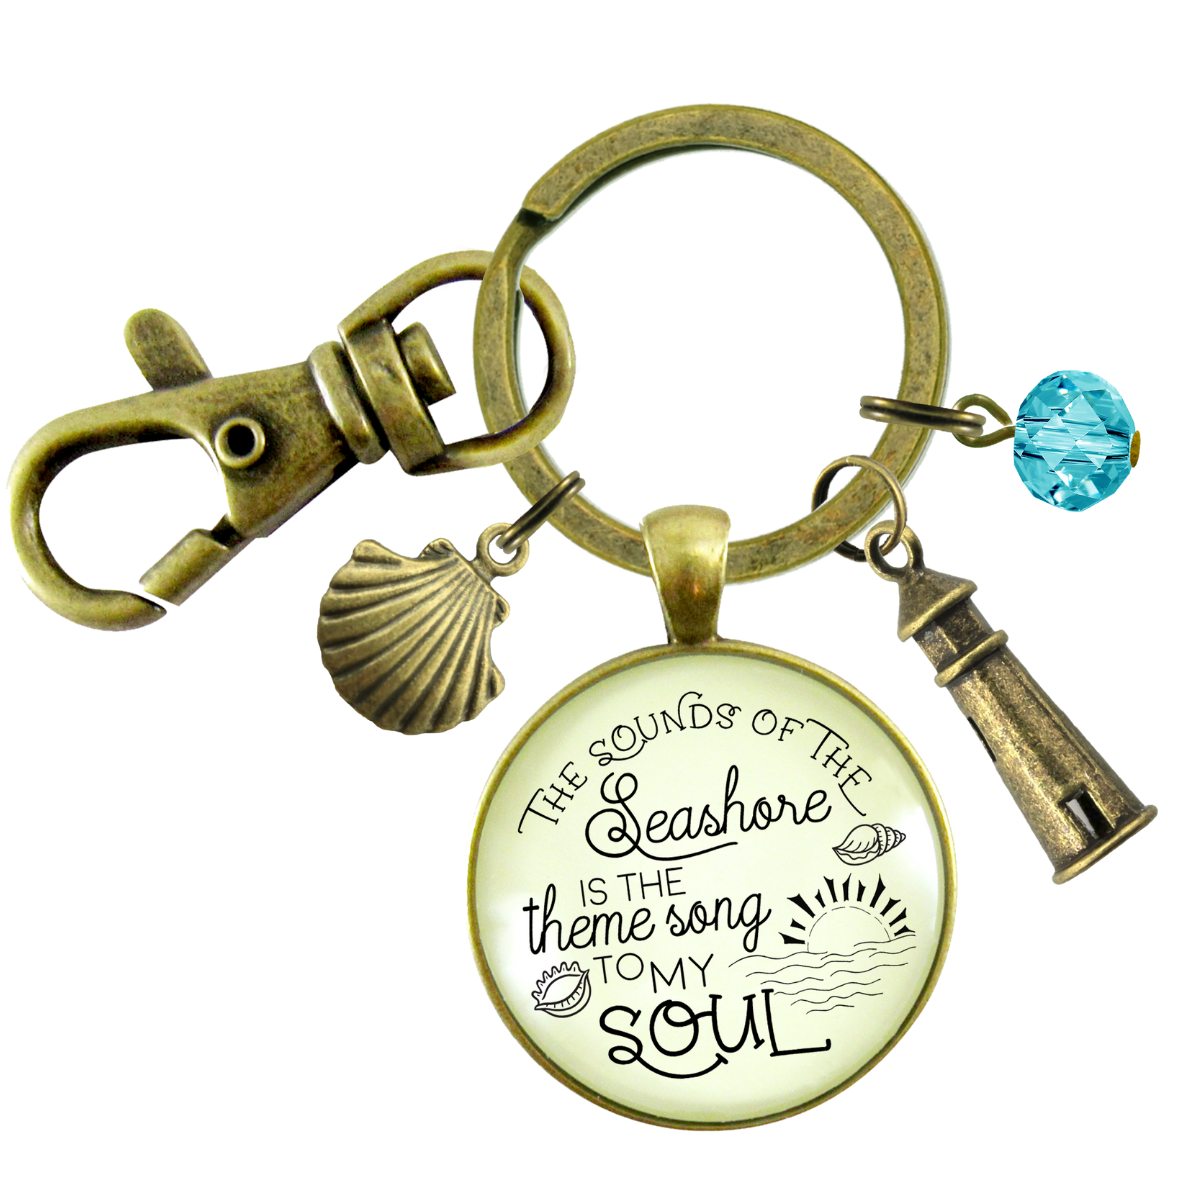 Gutsy Goodness You Are Capable of Amazing Things, Motivational and Inspirational Keychains